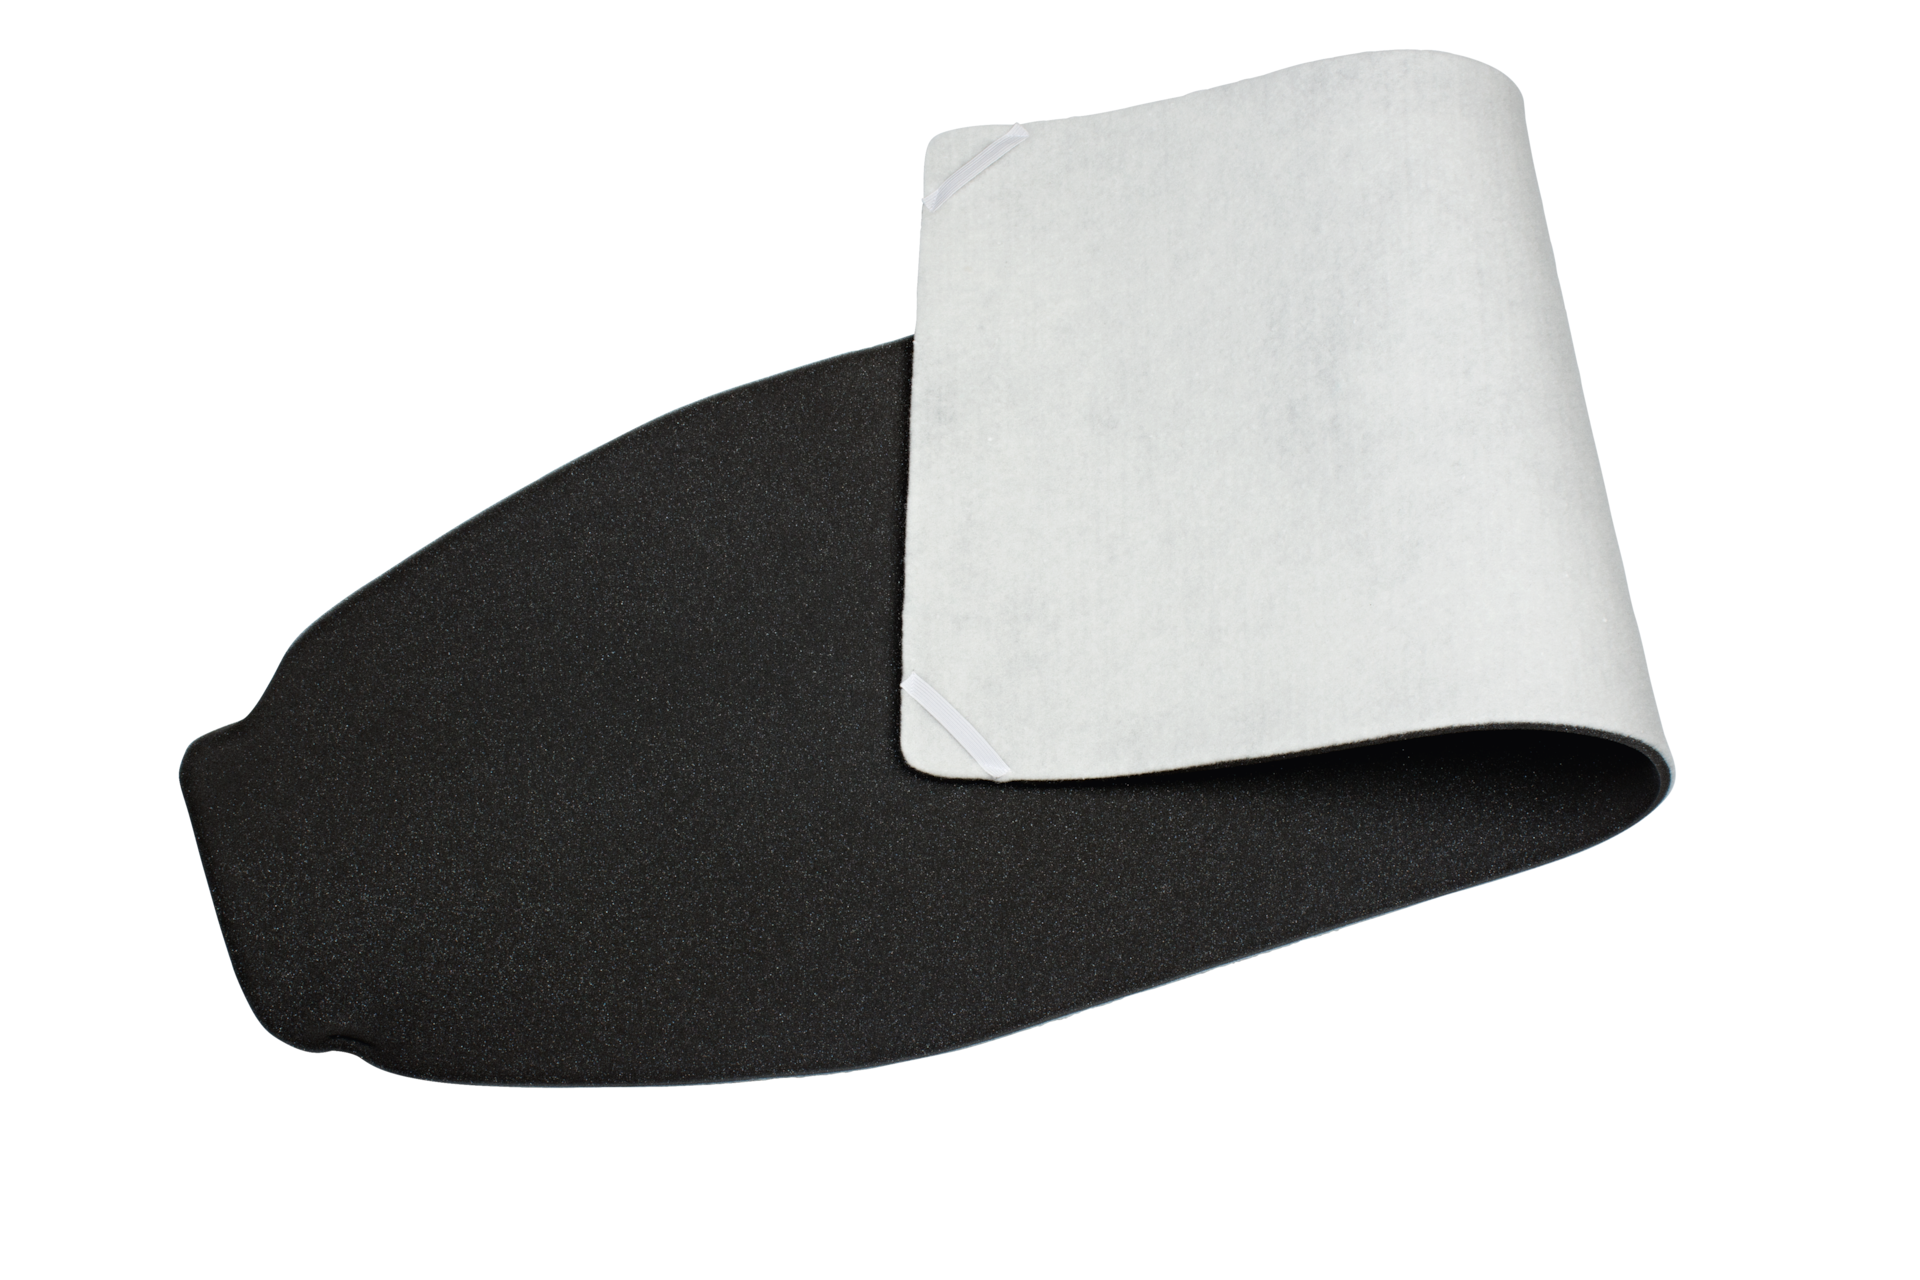 Spare parts - Domestic - Base Ironing board cover - 2